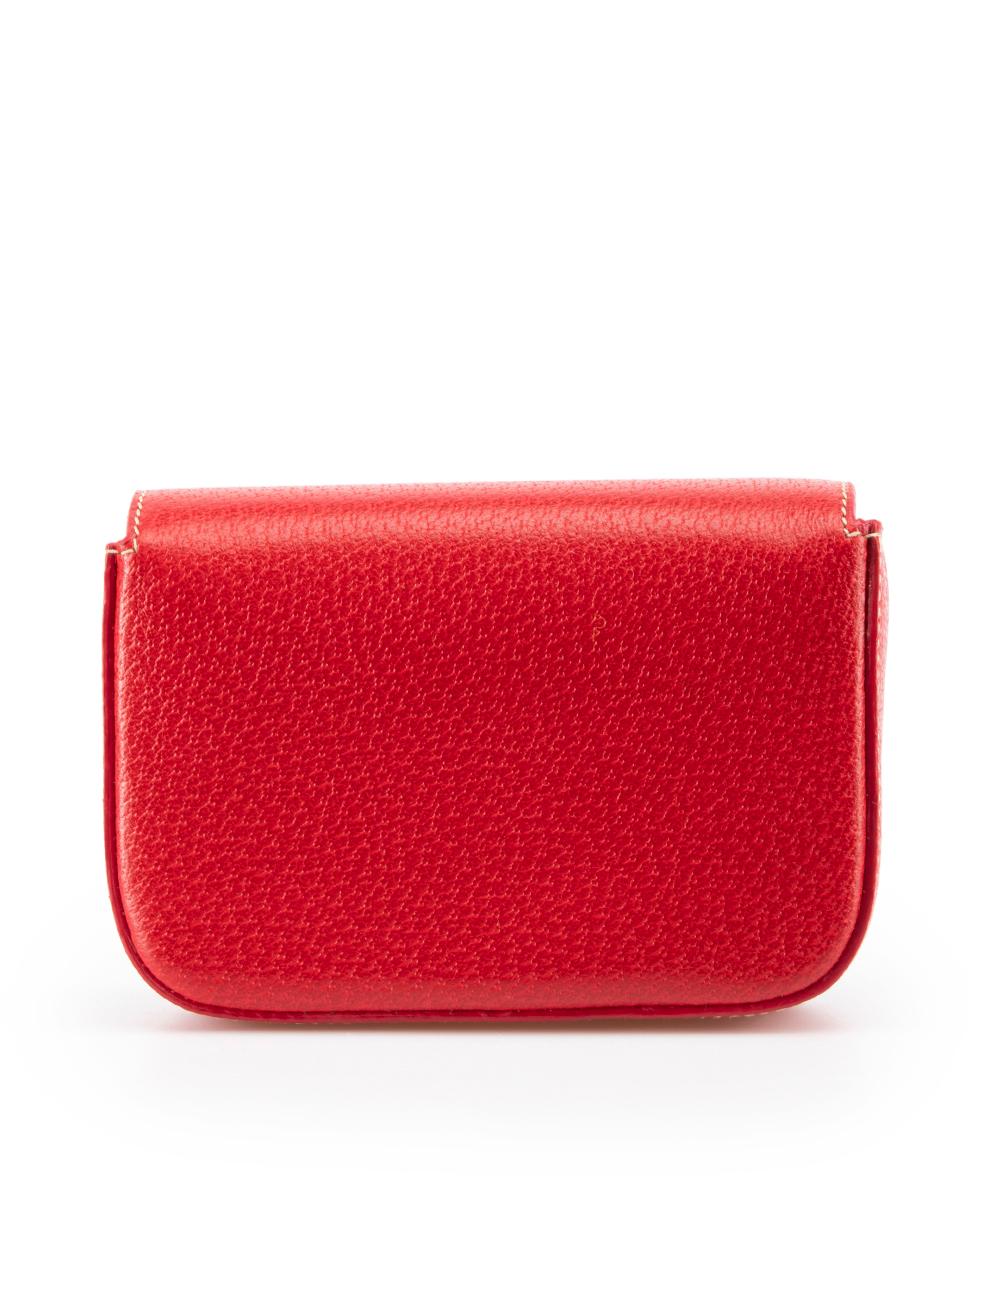 Prada Red Leather Cinghiale Logo Pouch In New Condition For Sale In London, GB